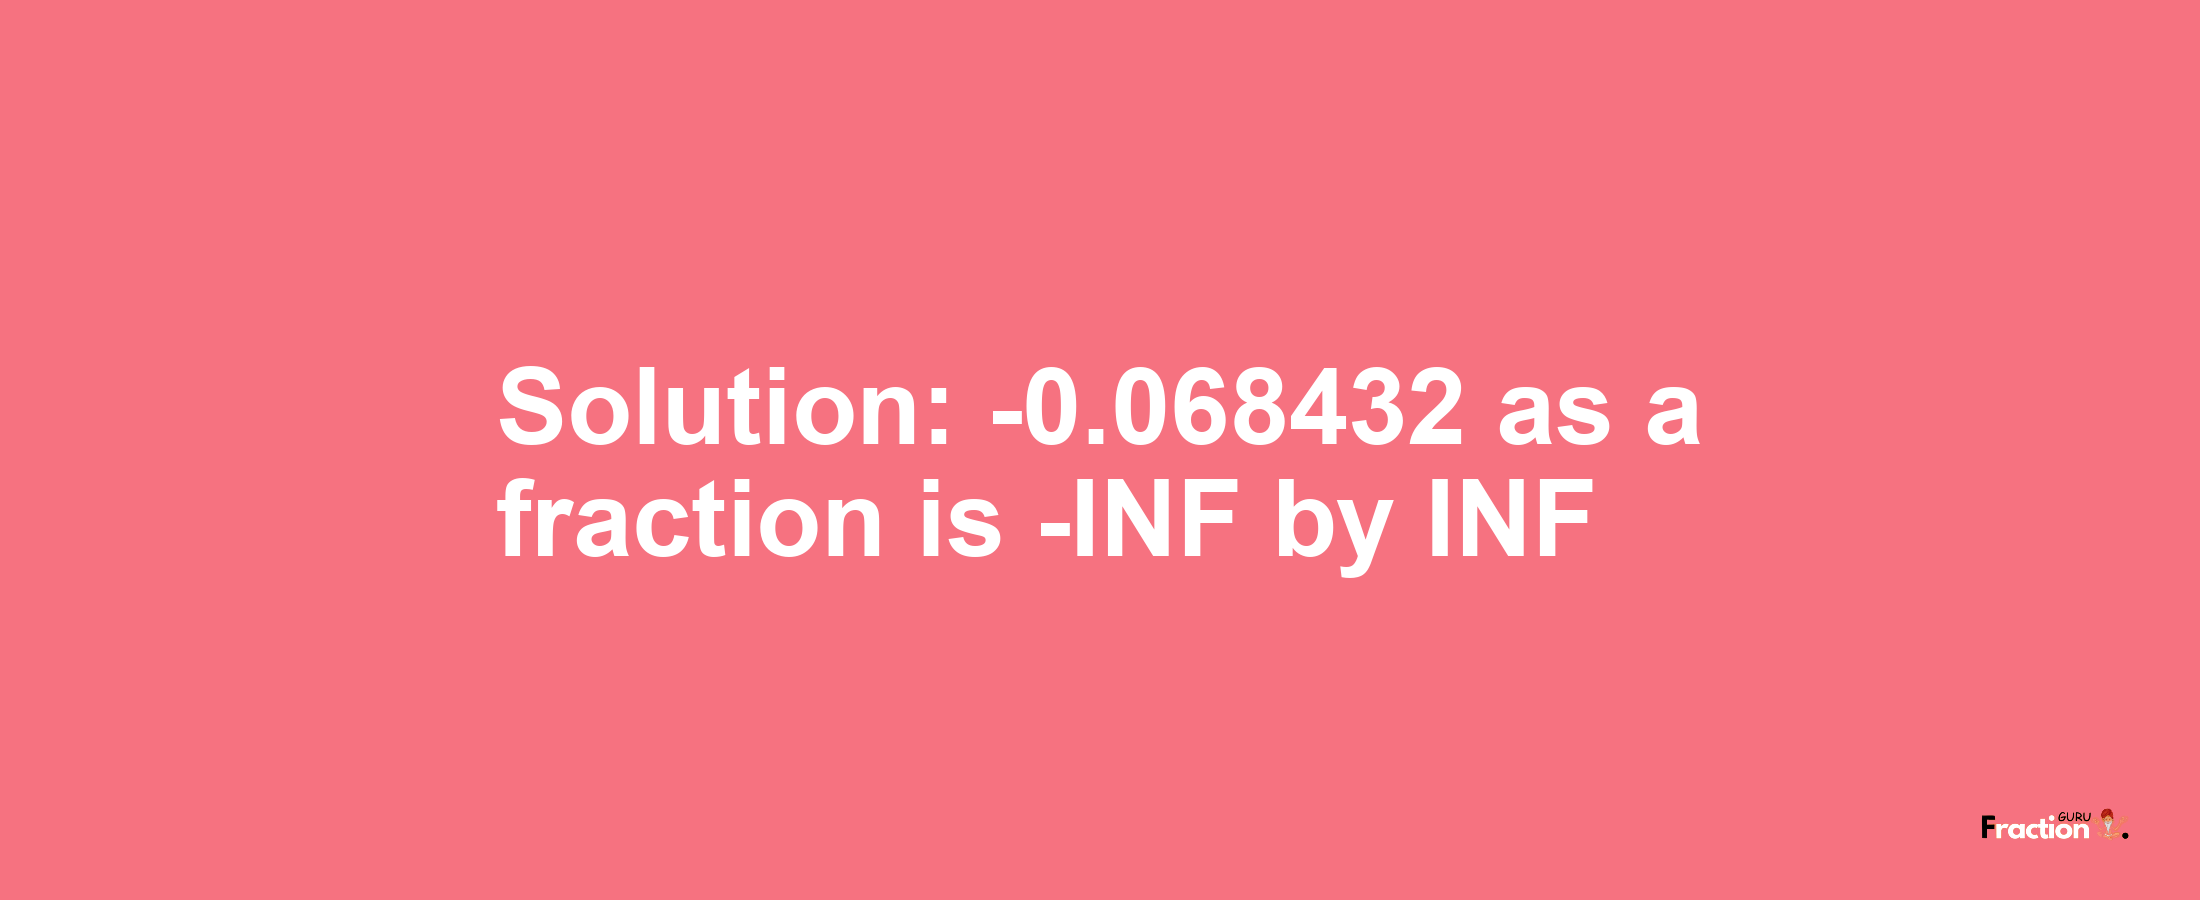 Solution:-0.068432 as a fraction is -INF/INF